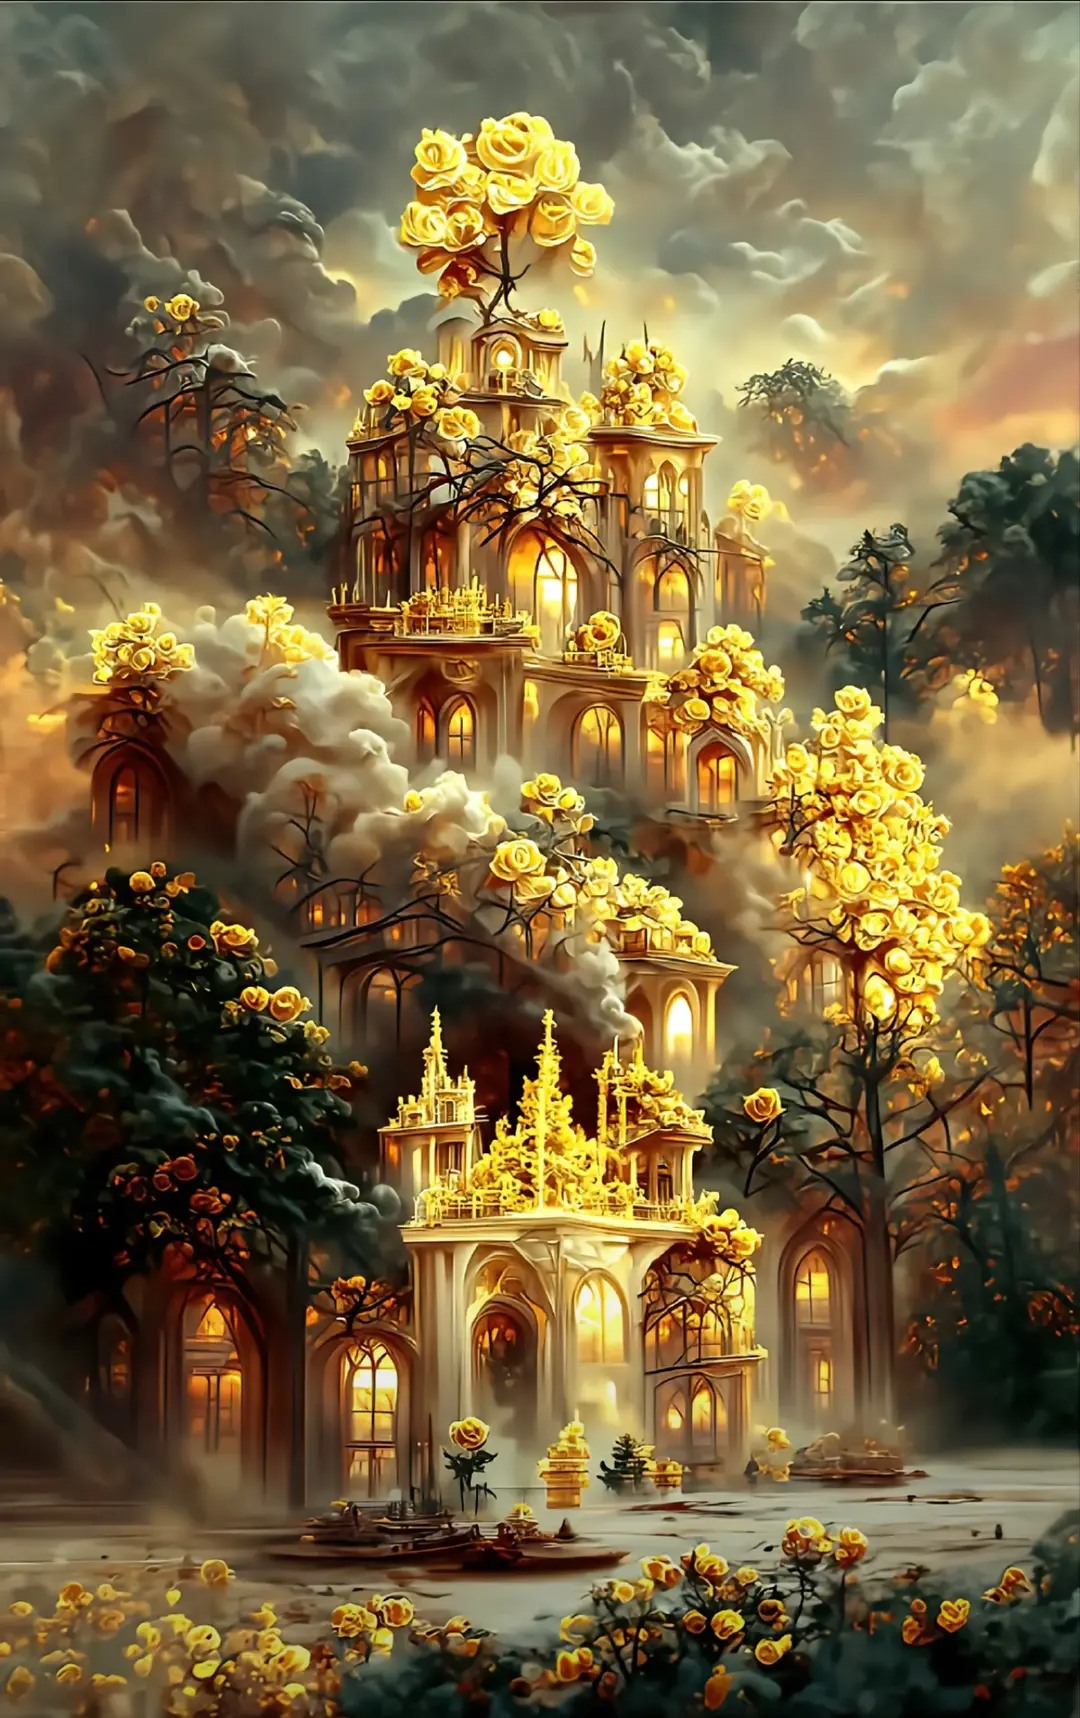 Gold Castle Scenery | Full Round/Square Diamond Painting Kits